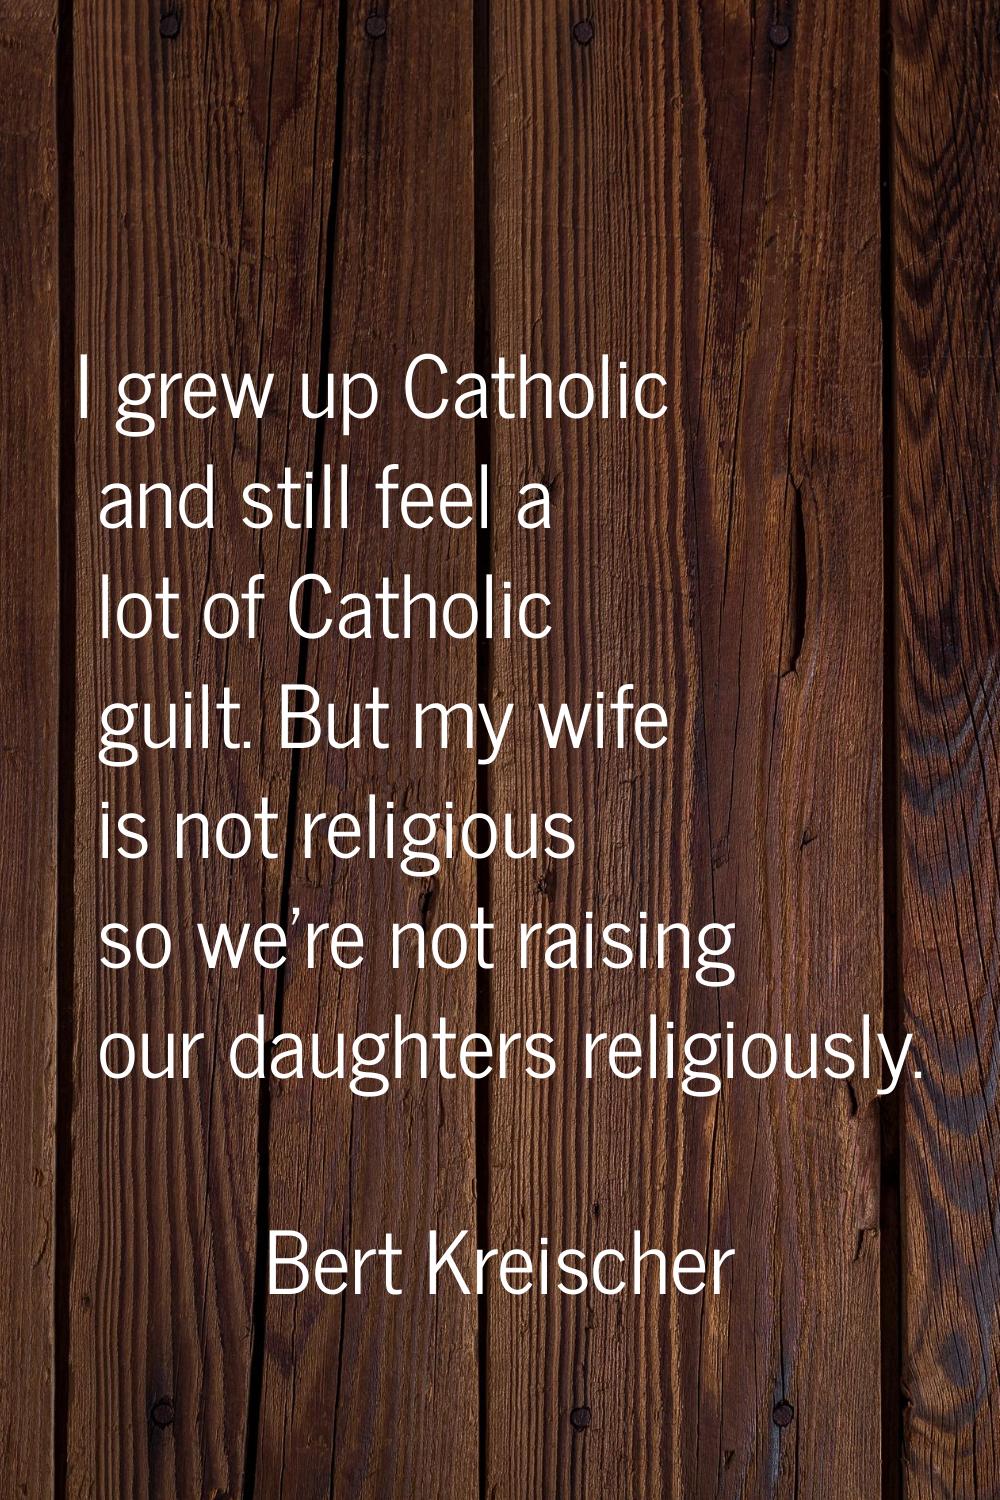 I grew up Catholic and still feel a lot of Catholic guilt. But my wife is not religious so we're no